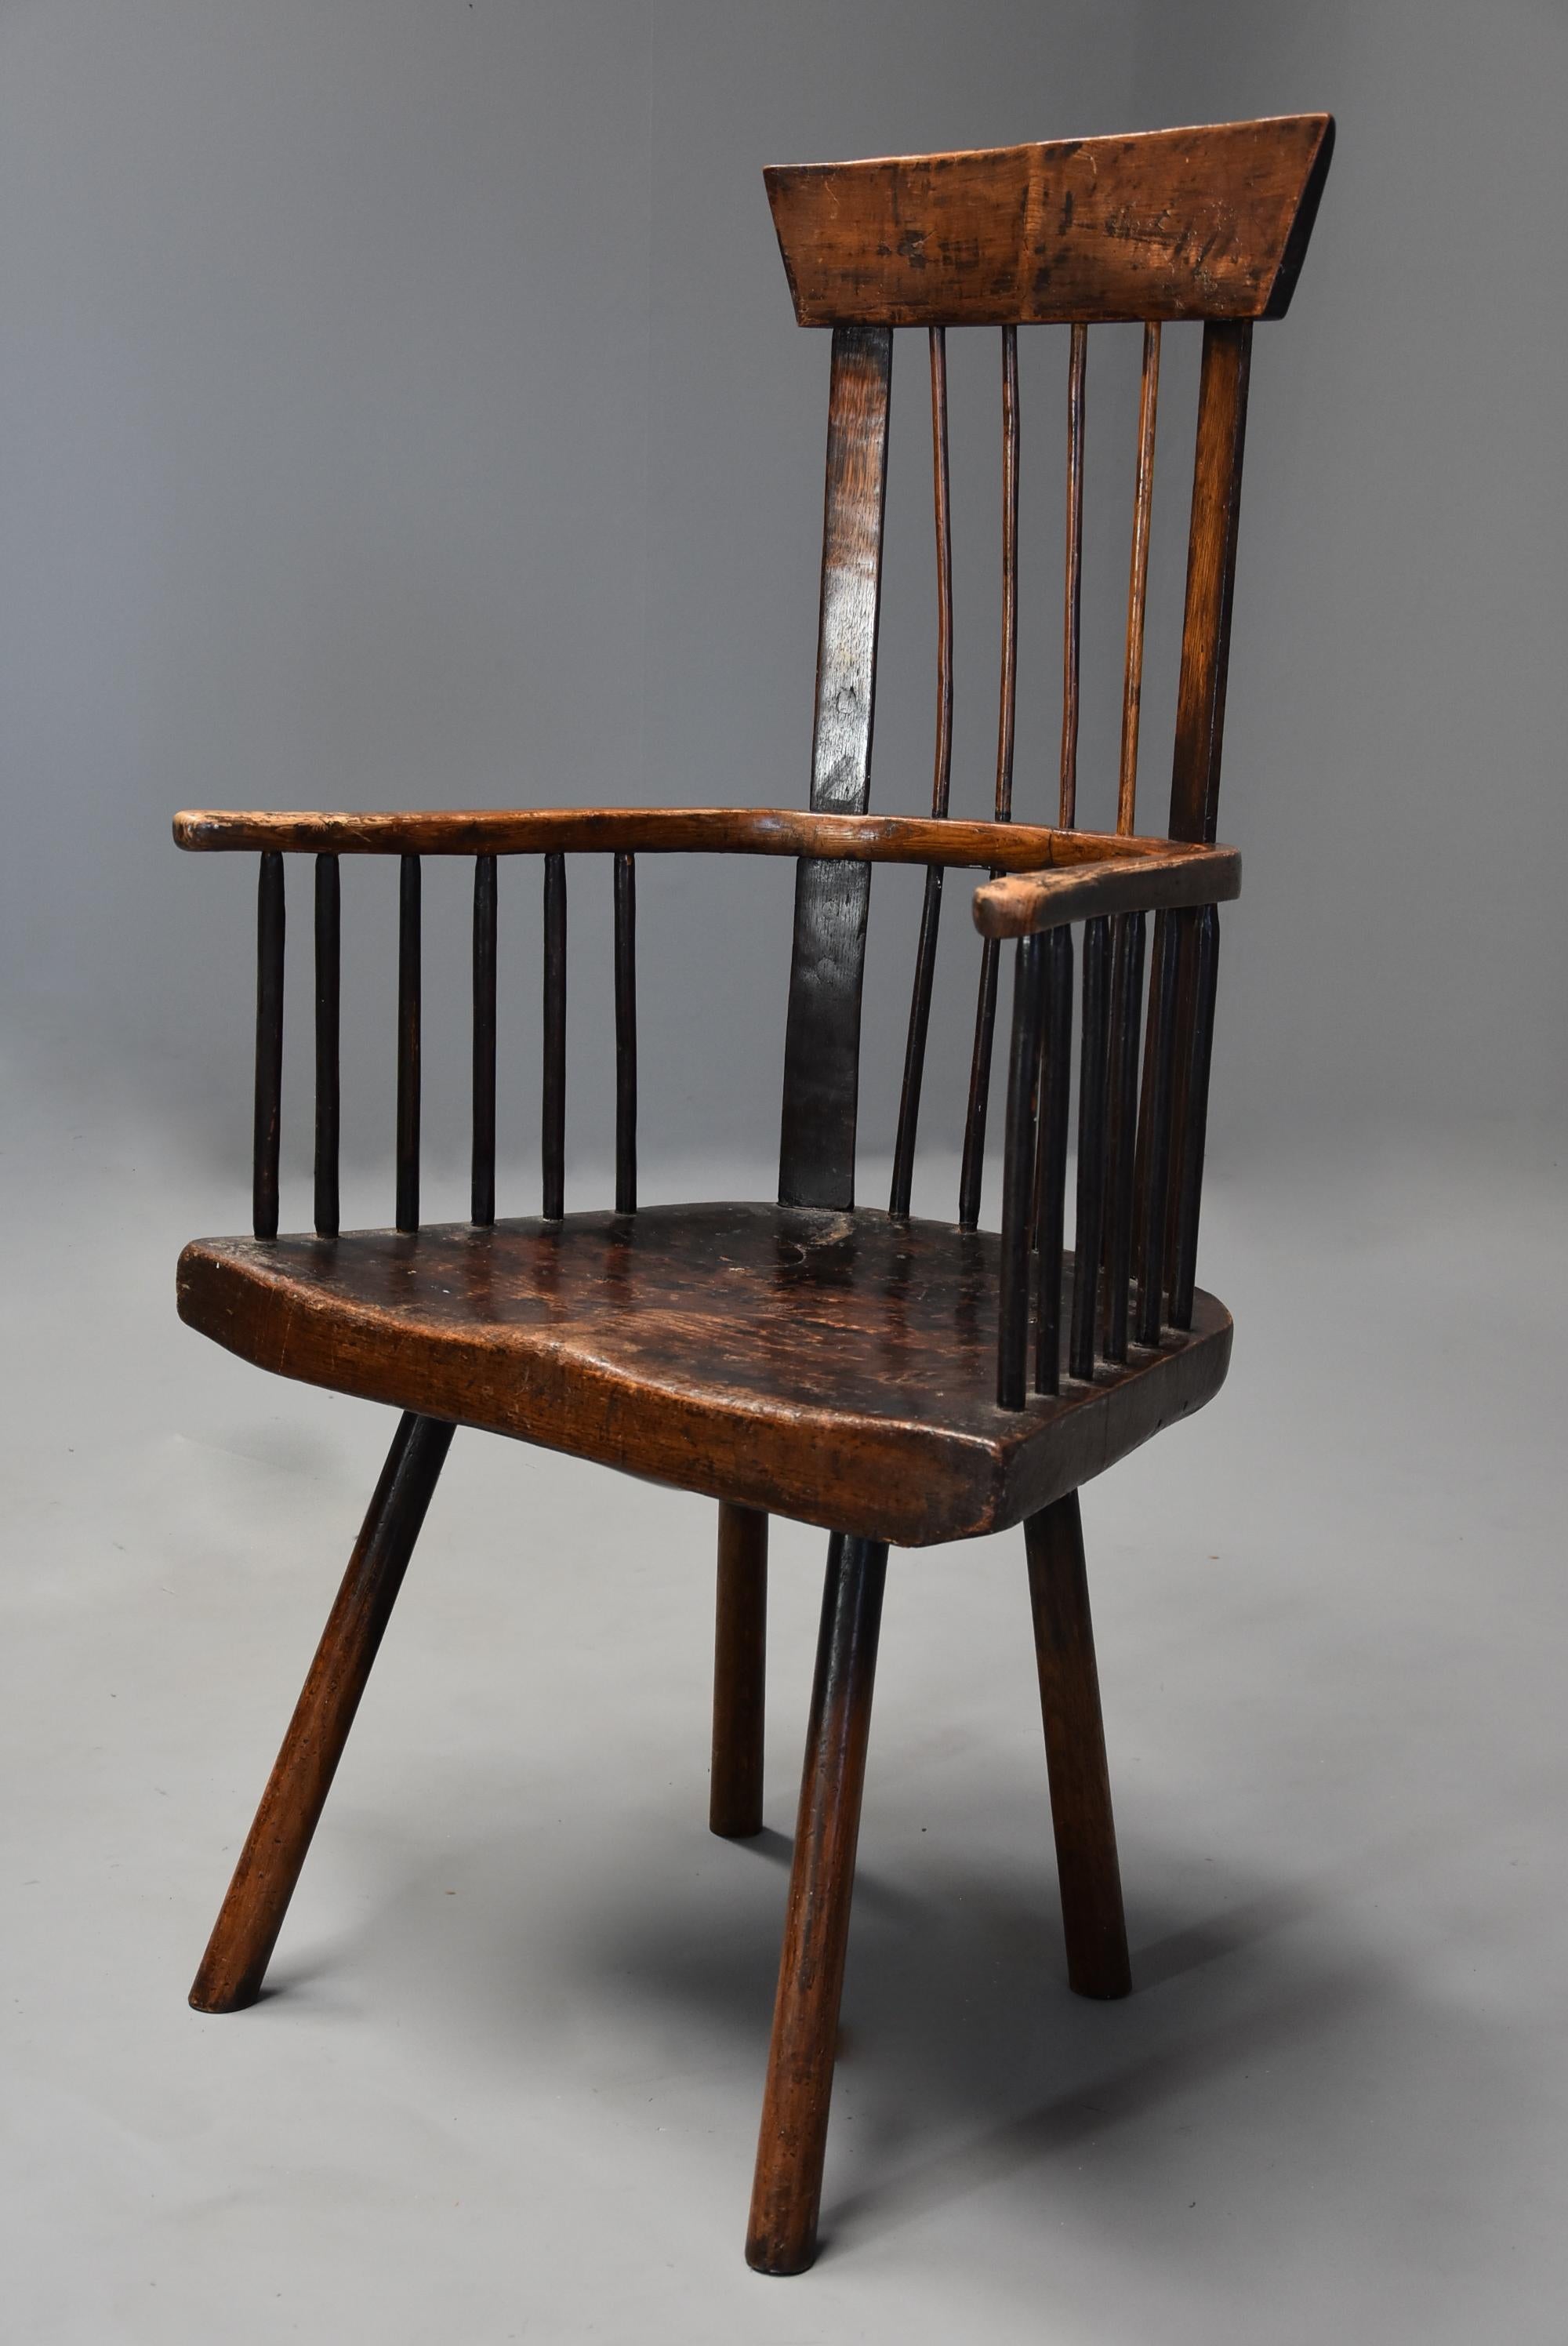 A mid 19th century Welsh primitive ash and elm comb back armchair with good patina (color).

This chairs consists of an ash comb back with four turned spindles with wider uprights, the arm bow supported by turned spindles leading down to the